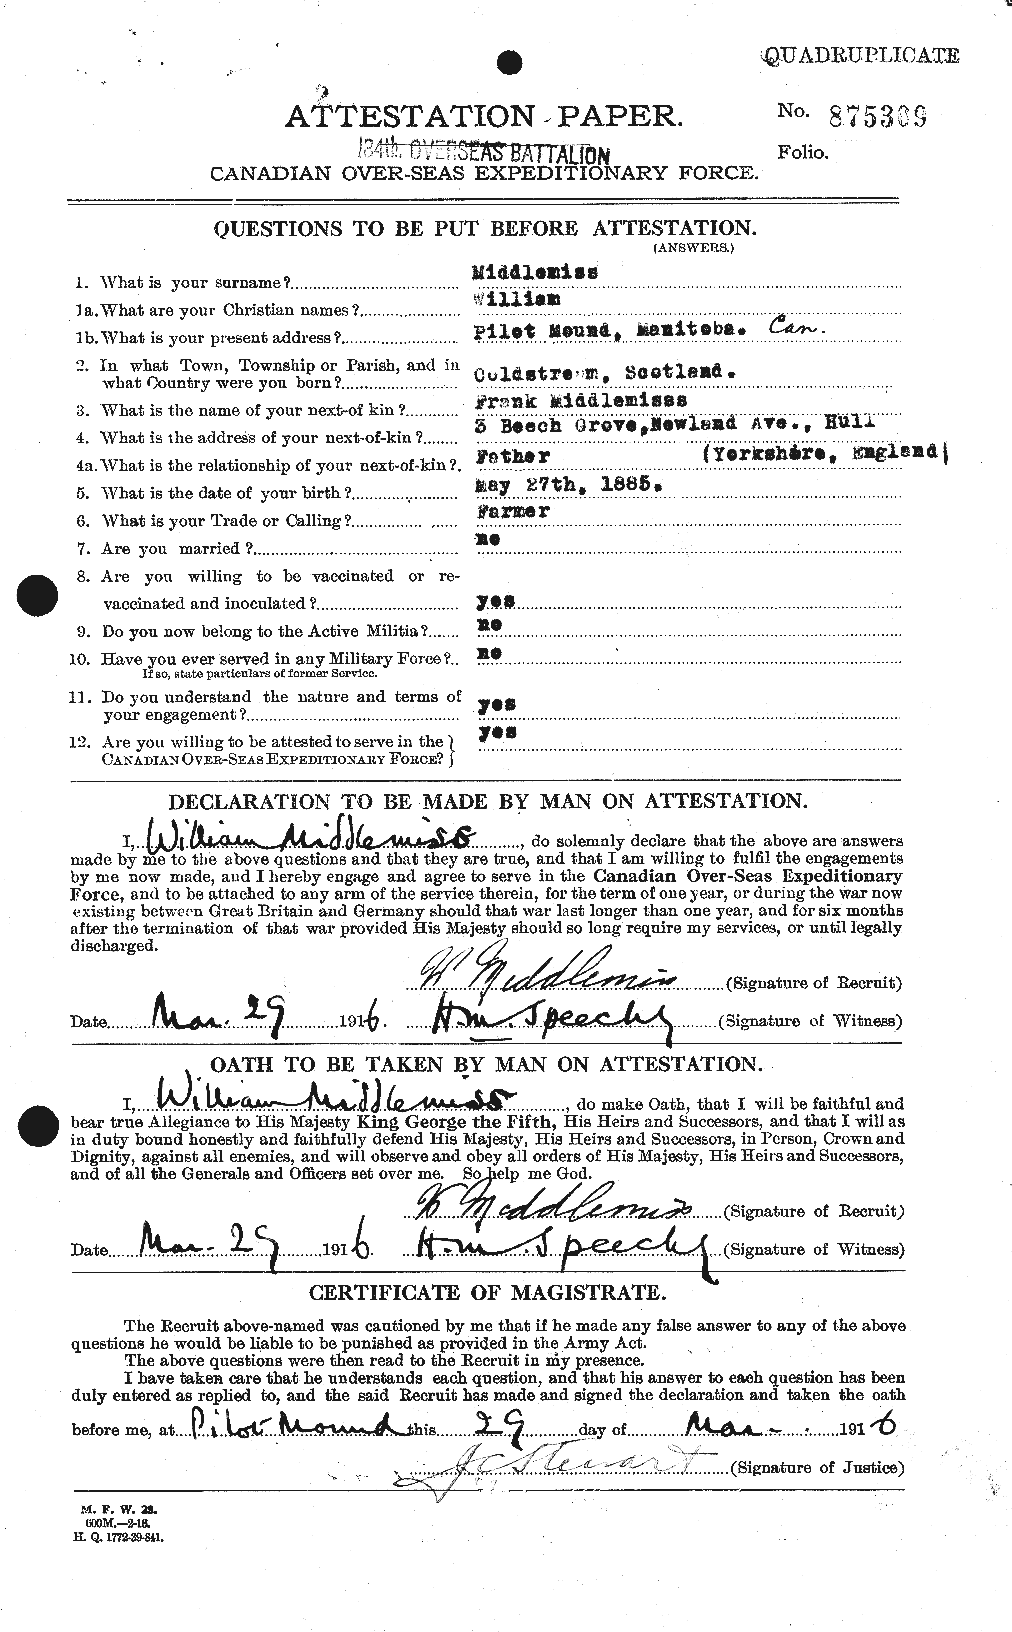 Personnel Records of the First World War - CEF 493011a